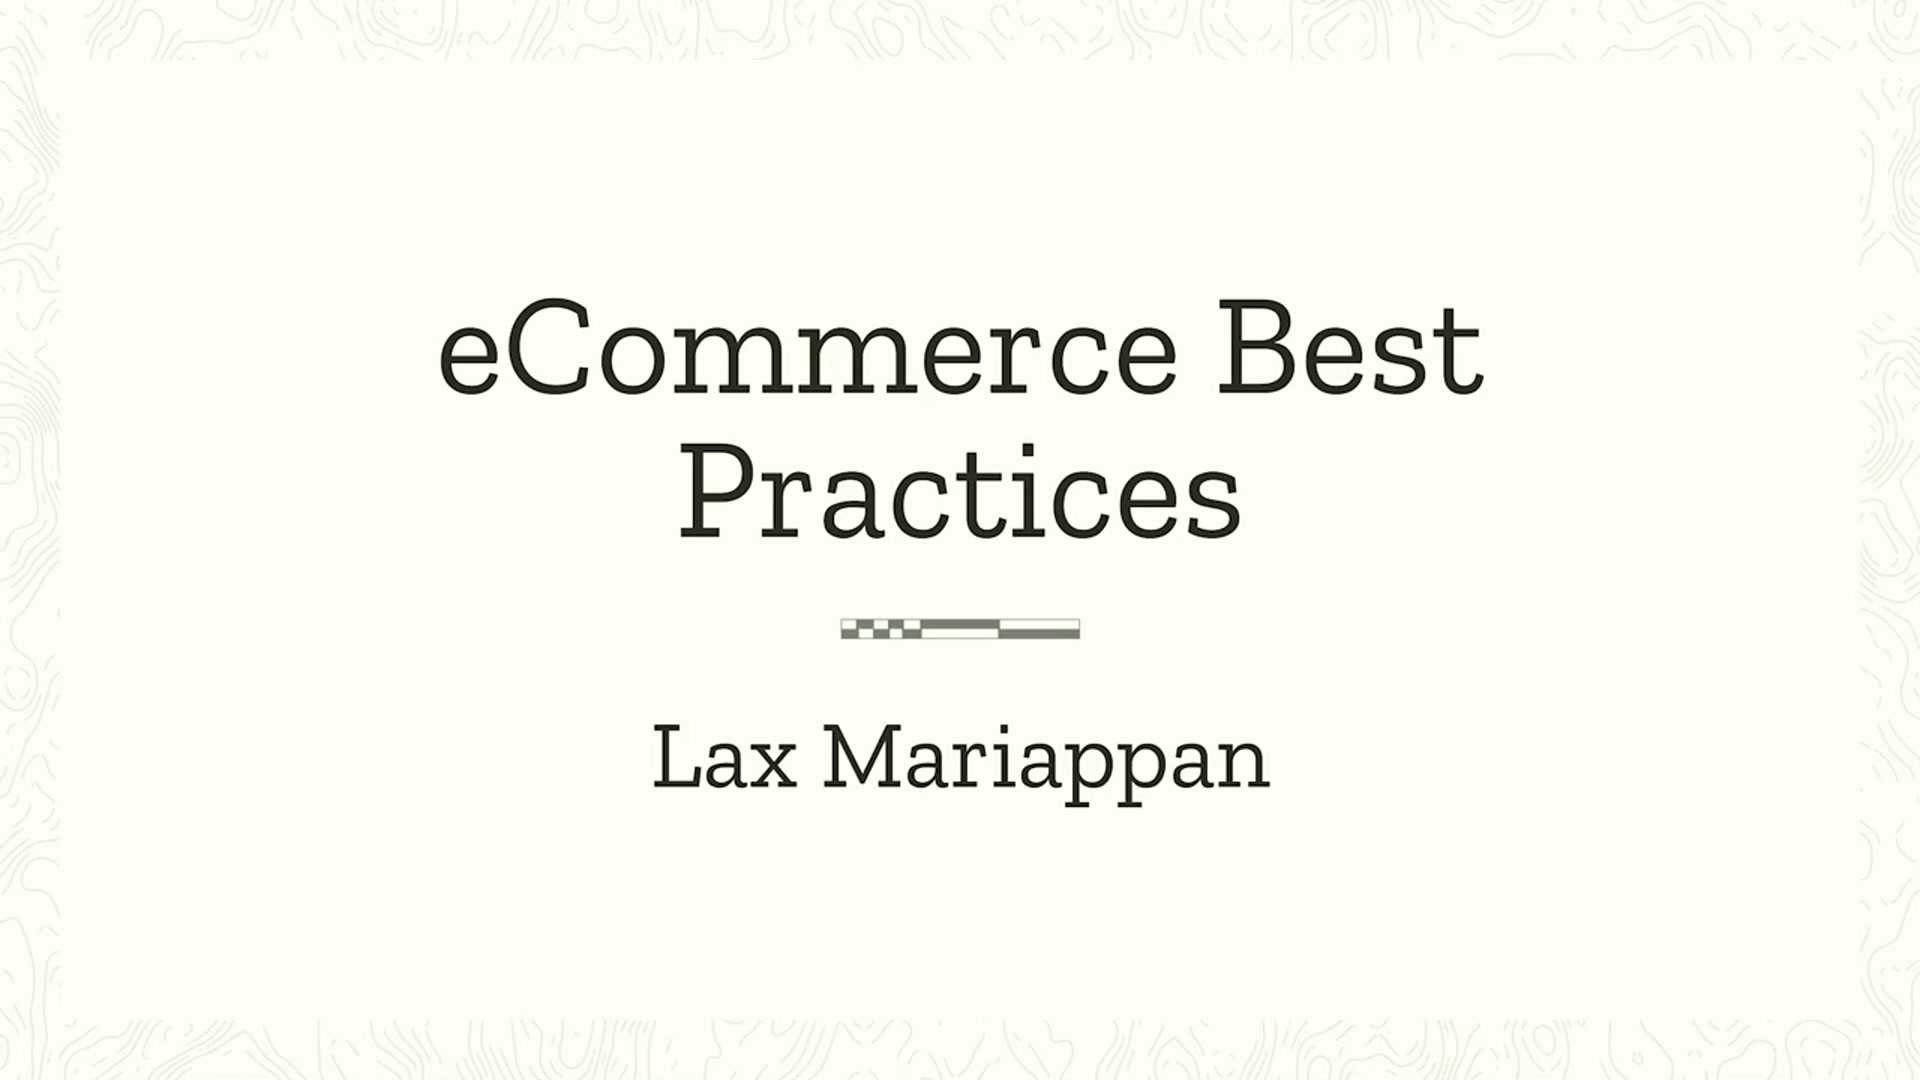 Lax Mariappan: eCommerce best practices: Wooing your customers is easier than you think